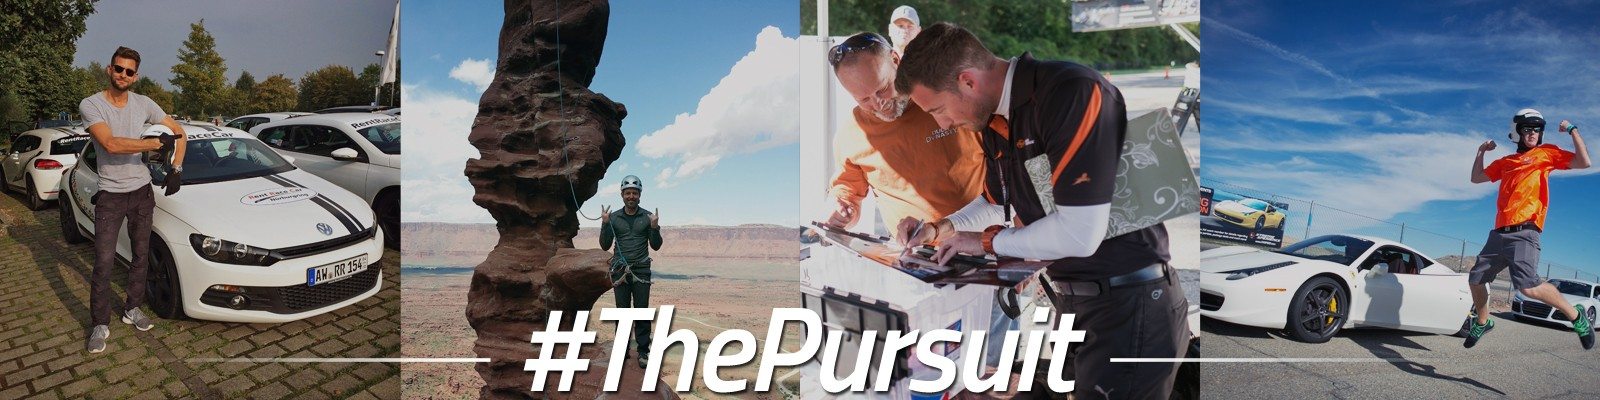 photos of people on the pursuit to achieving their goals and dreams